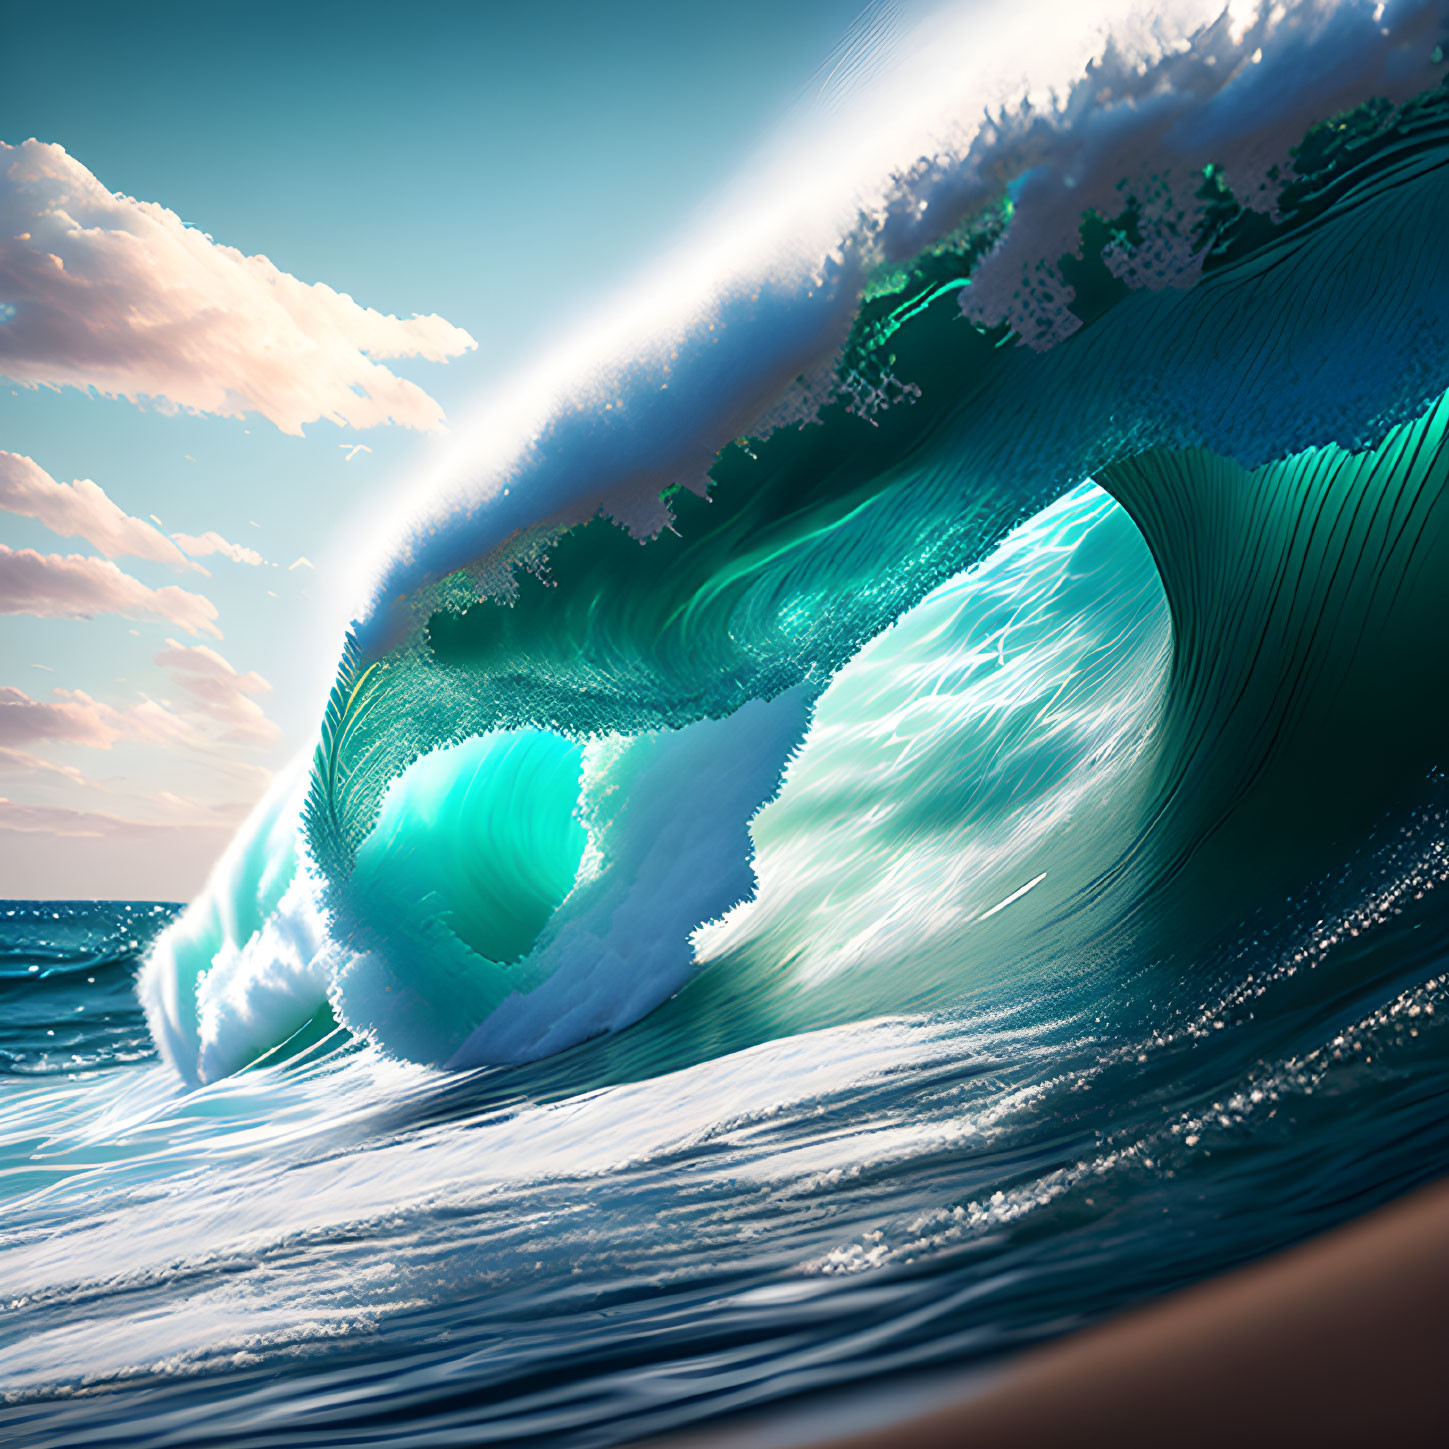 Turquoise Wave Curling Against Serene Blue Sky